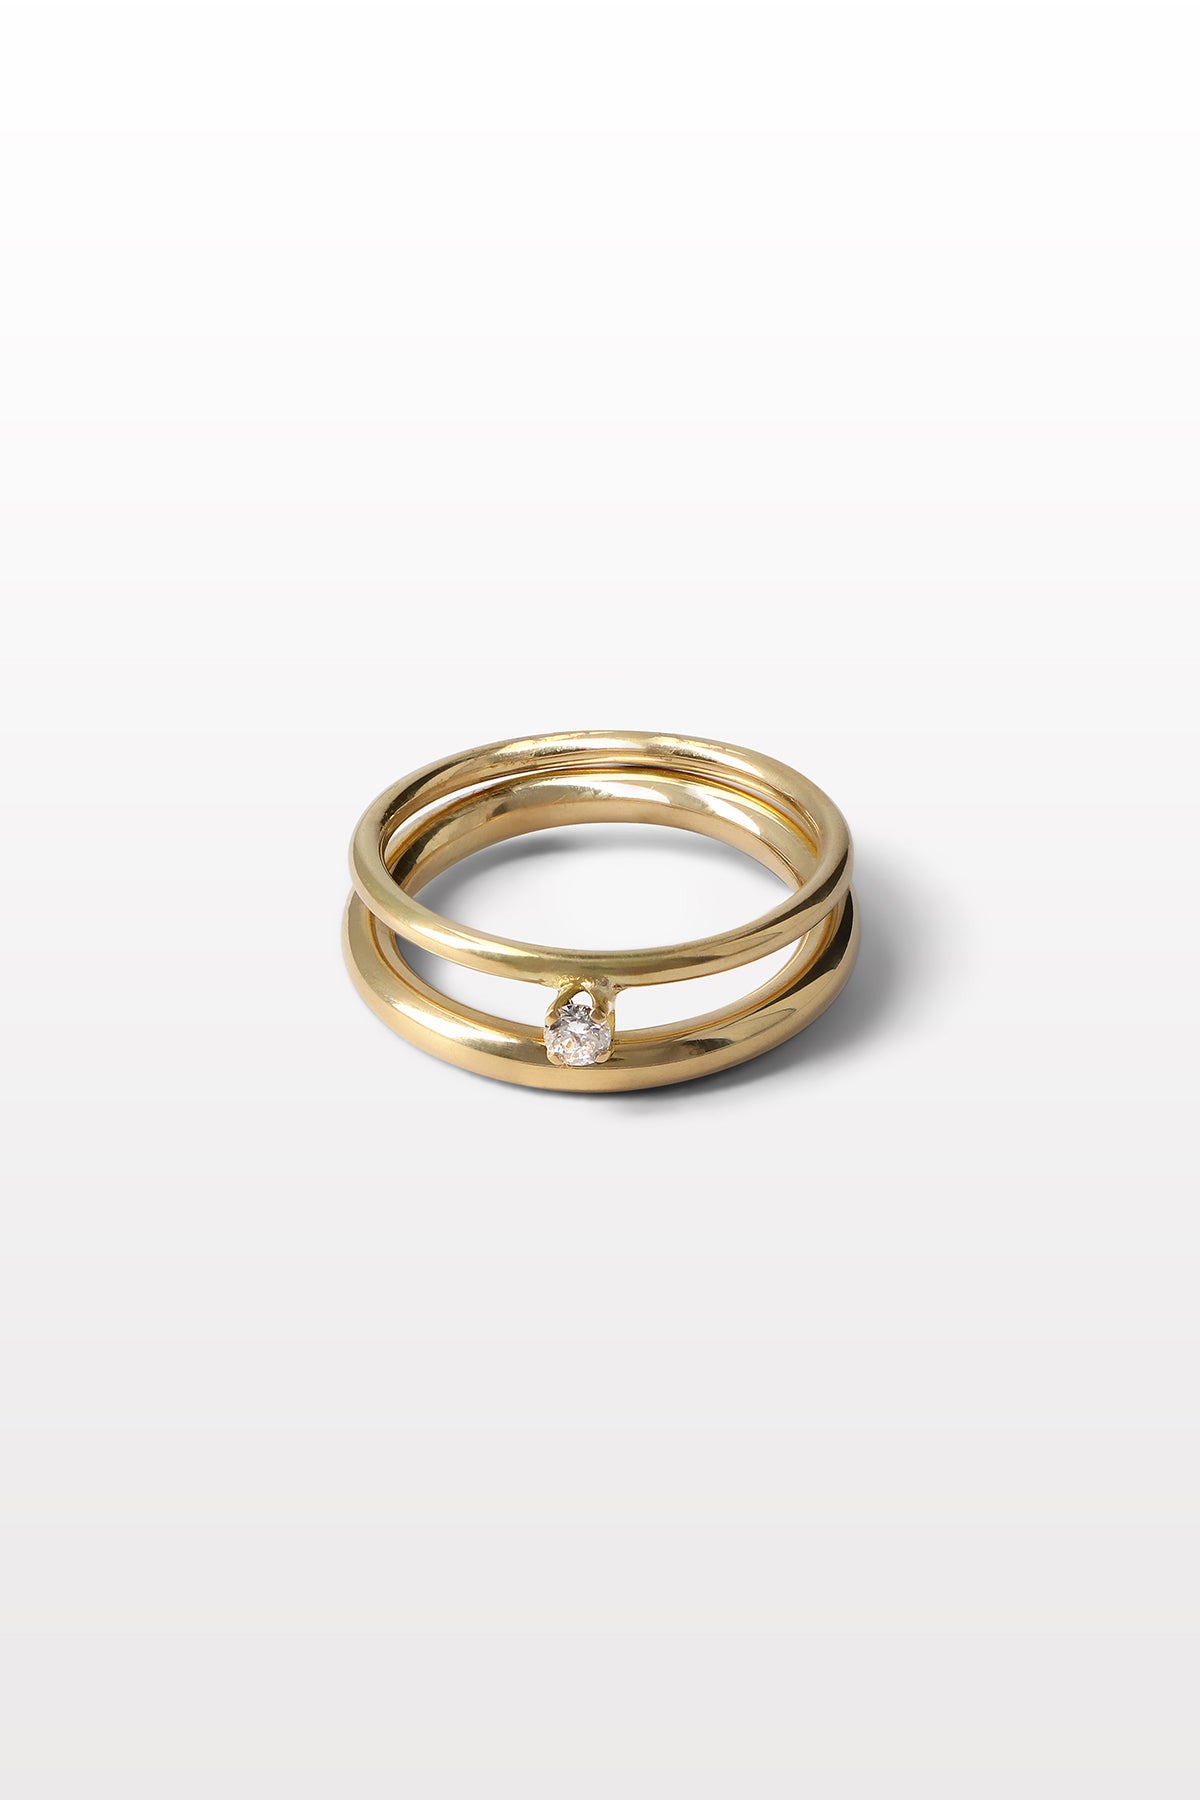 ODE+ Ring 03 Gold Plated Silver